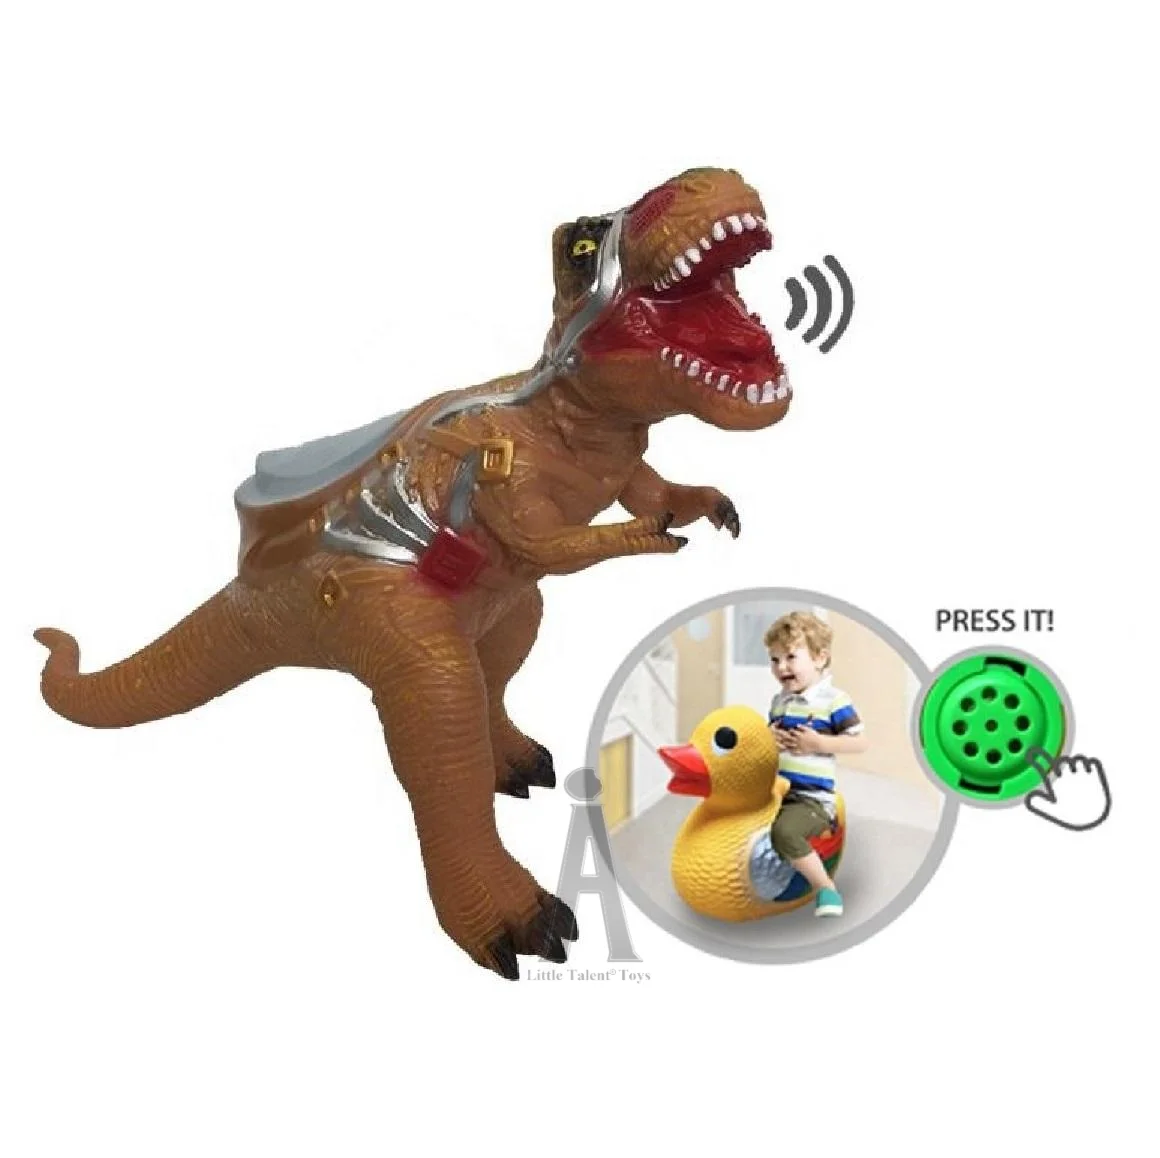 Toys China Supplier Ride On Toy Animals For Kids Ride On Toy Dinosaur Load  Bearing 45kg - Buy Ride On Toy Animals,Ride On Toy,Toy Dinosaur Product on  